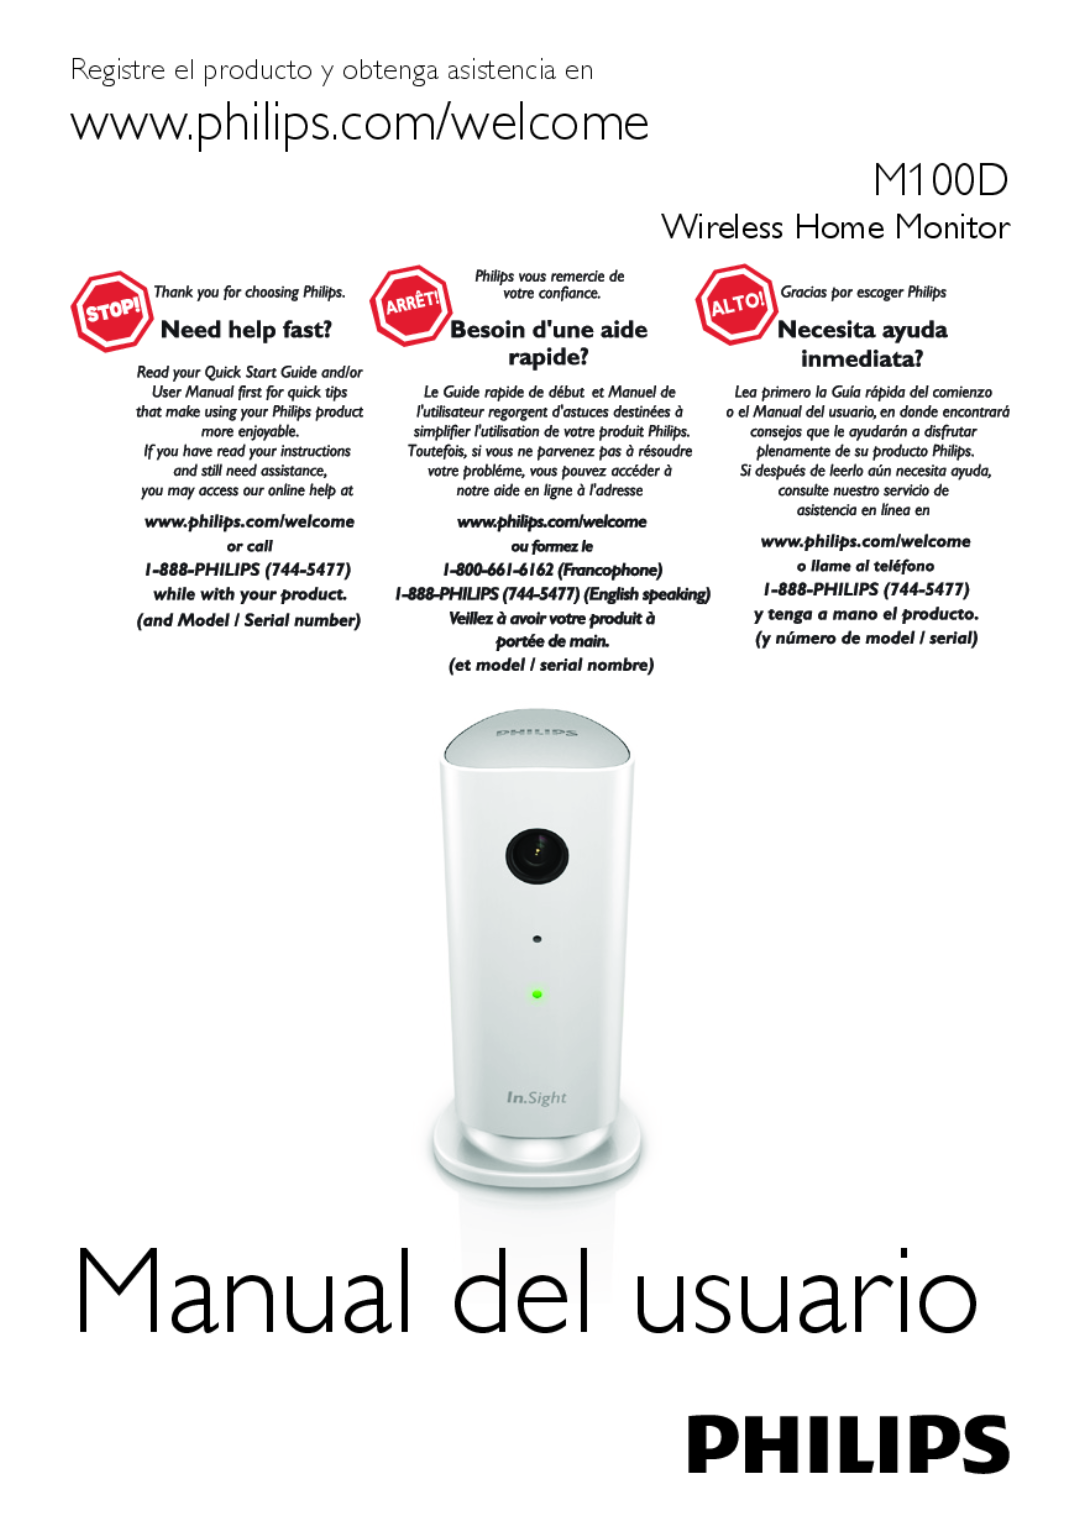 Philips user manual User manual, Always there to help you, Question? Contact Philips, M100D Wireless Home Monitor 